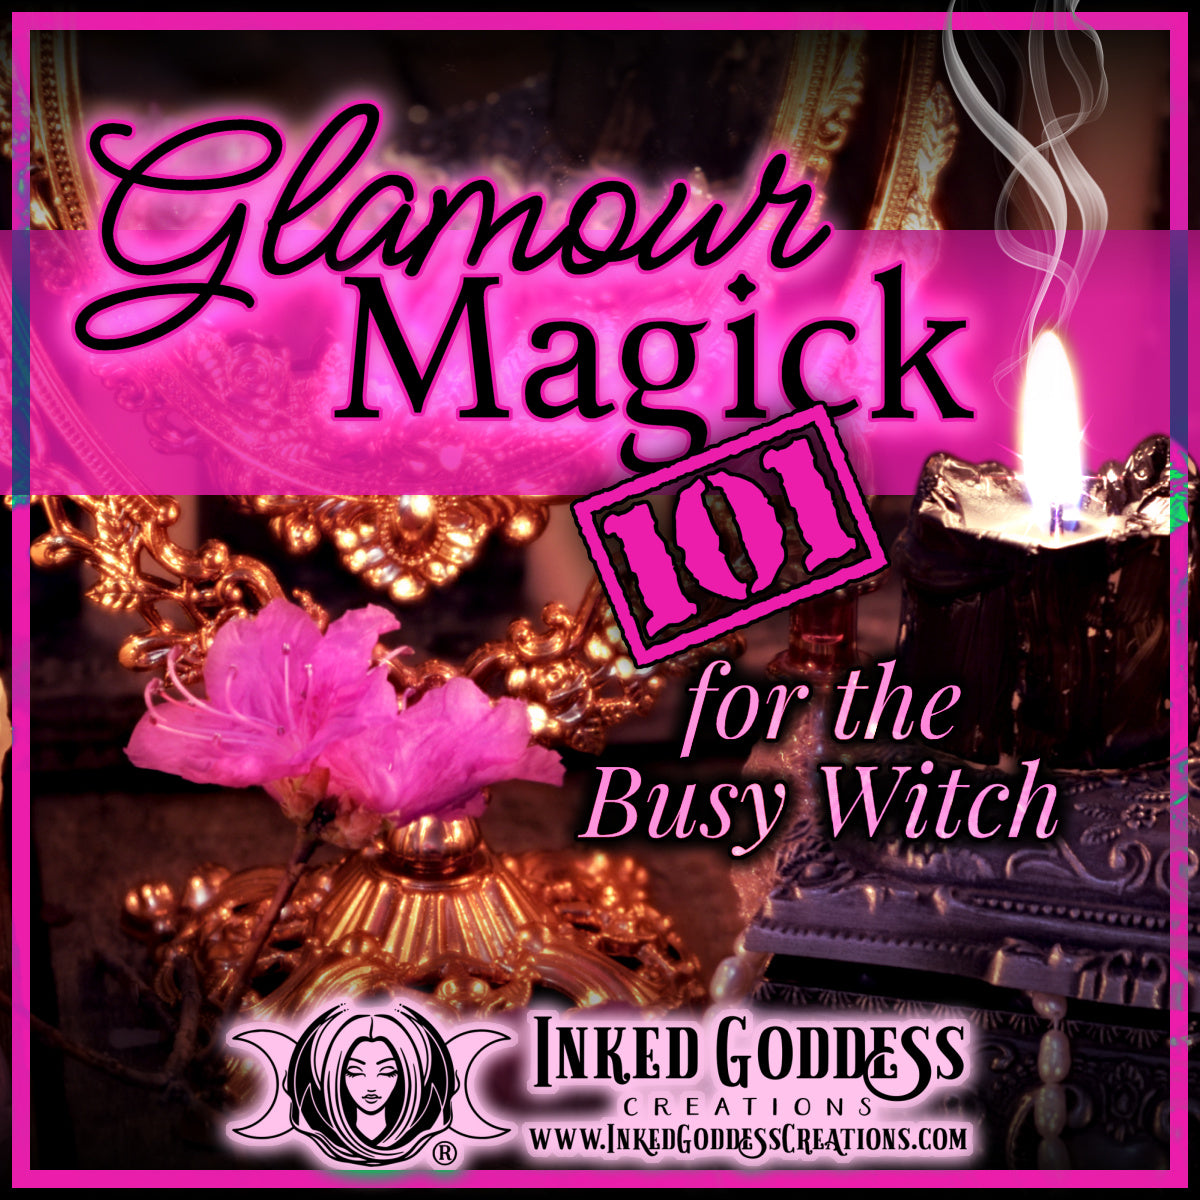 Glamour Magick 101 for the Busy Witch